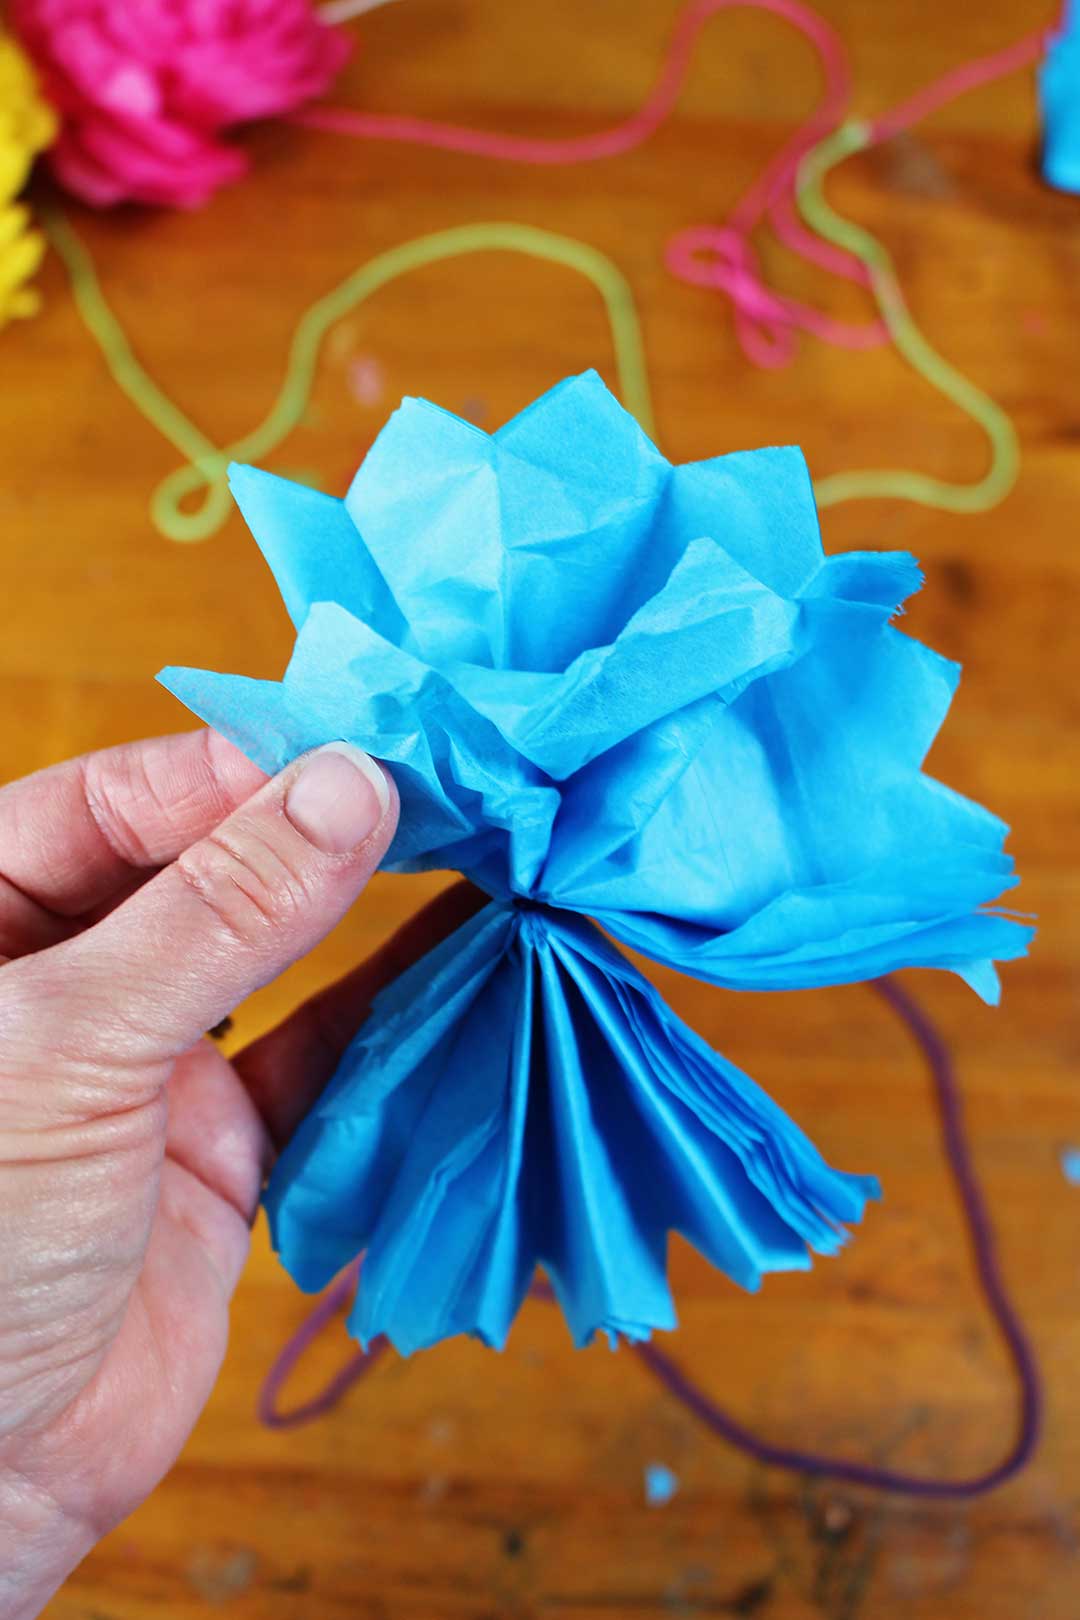 How To Make Tissue Paper Pom Poms: 3 Different Ways